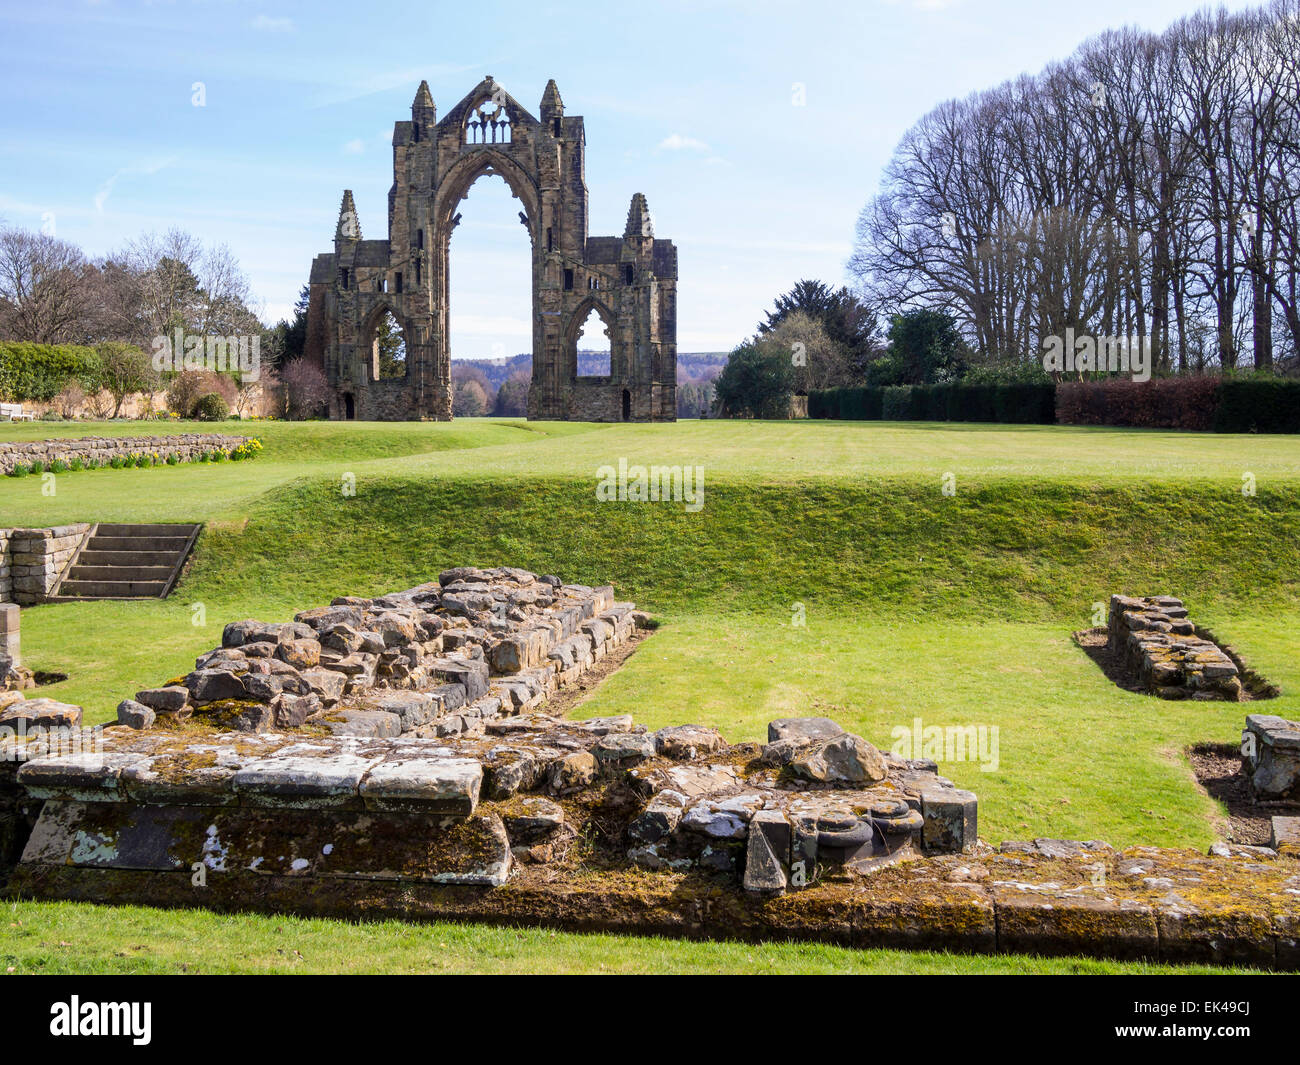 The ruins of the east end of a 14th century  Augustinian priory founded by the Bruce family, afterwards Kings of Scotland. Stock Photo